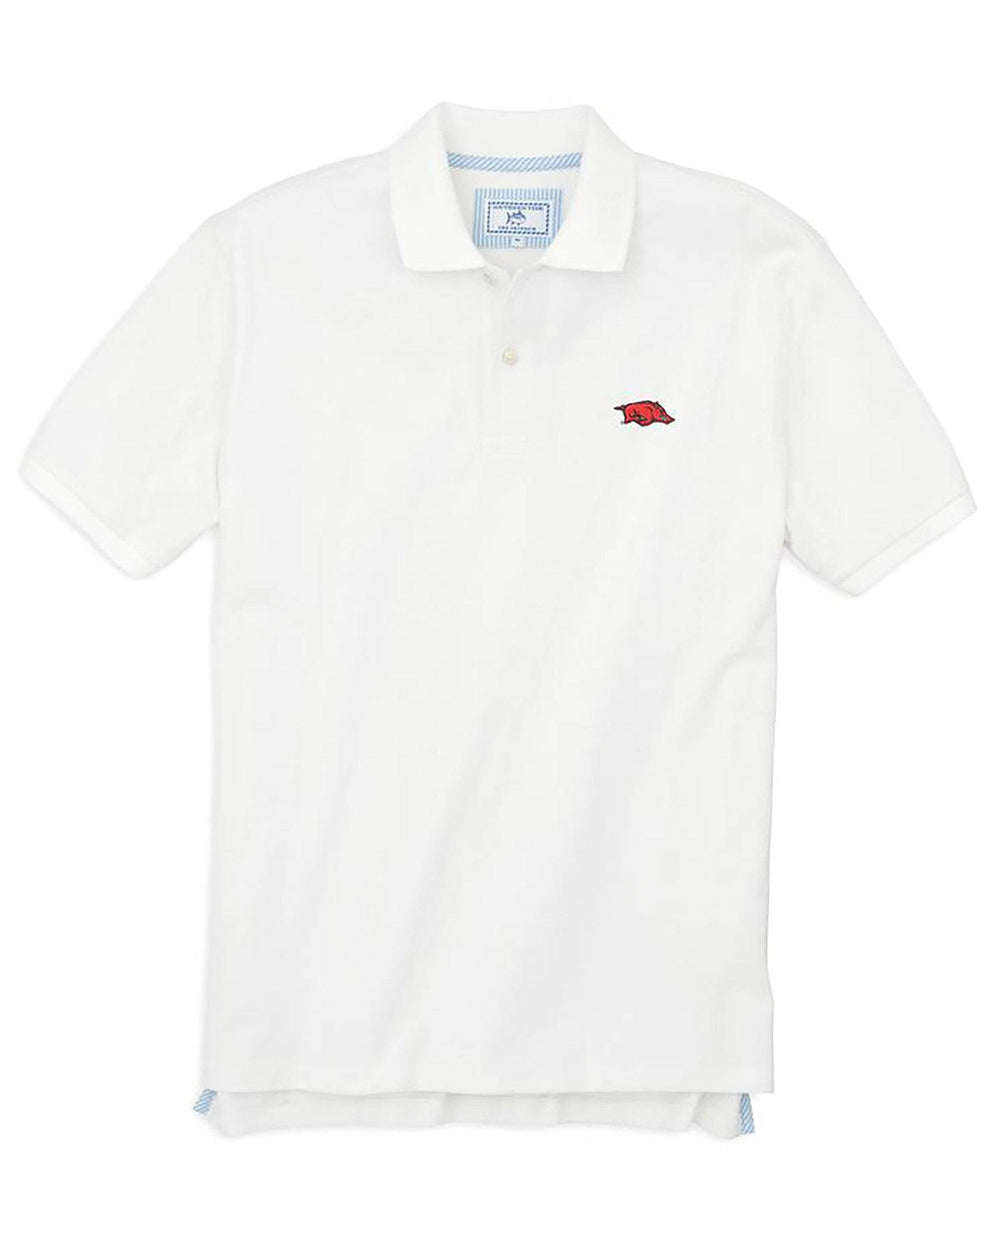 The front view of the Men's White Arkansas Razorbacks Pique Polo Shirt by Southern Tide - Classic White